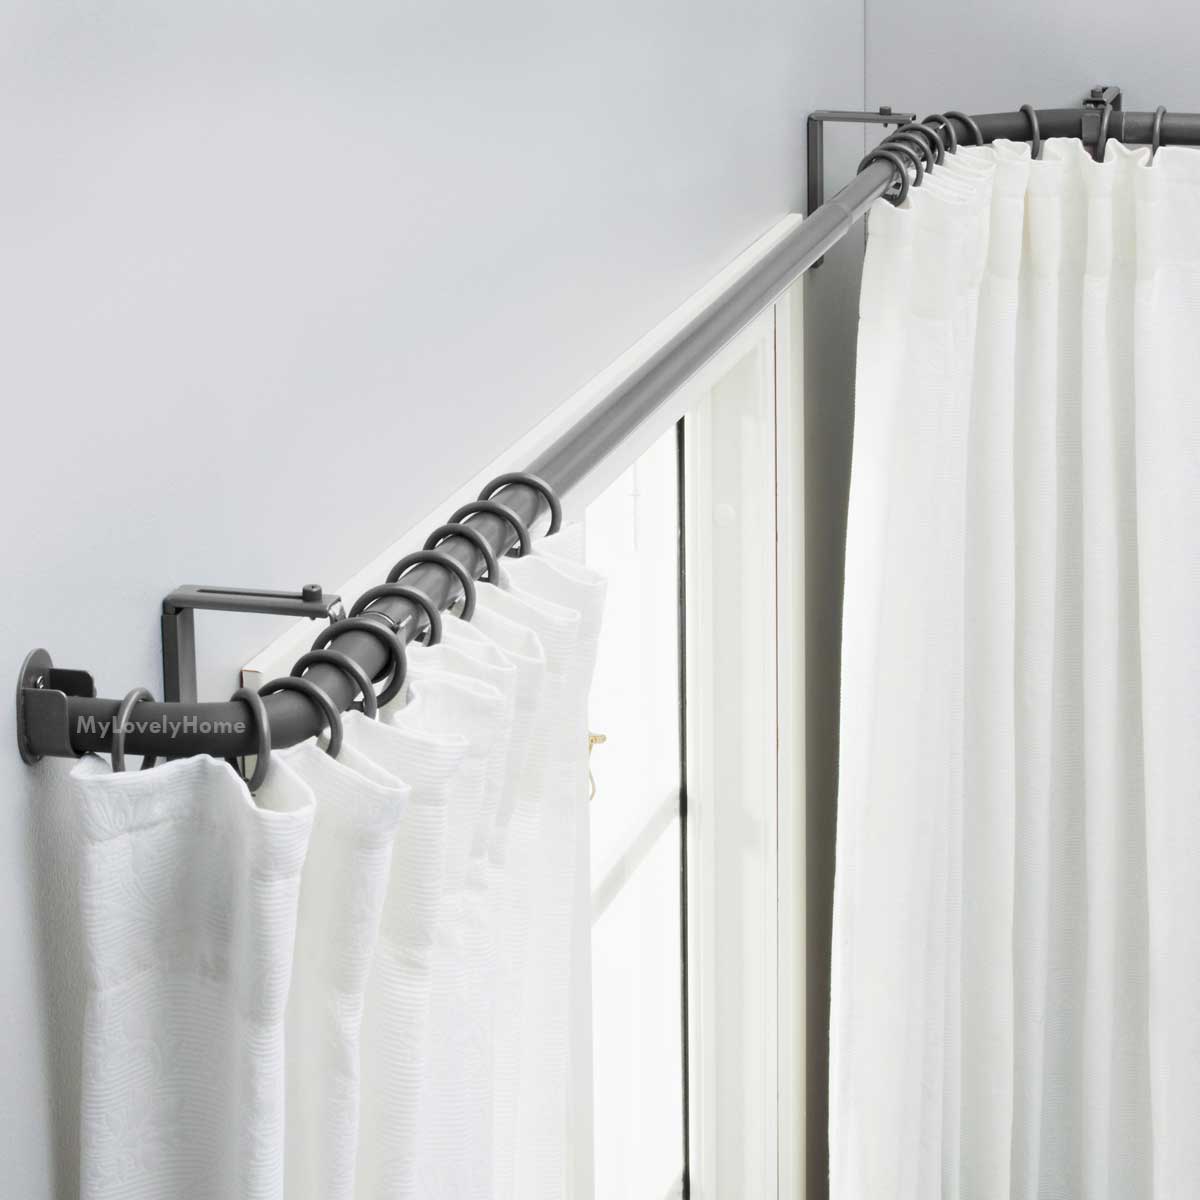 L Shape Window Curtain Rod Ideas and How It Made - My Lovely Home